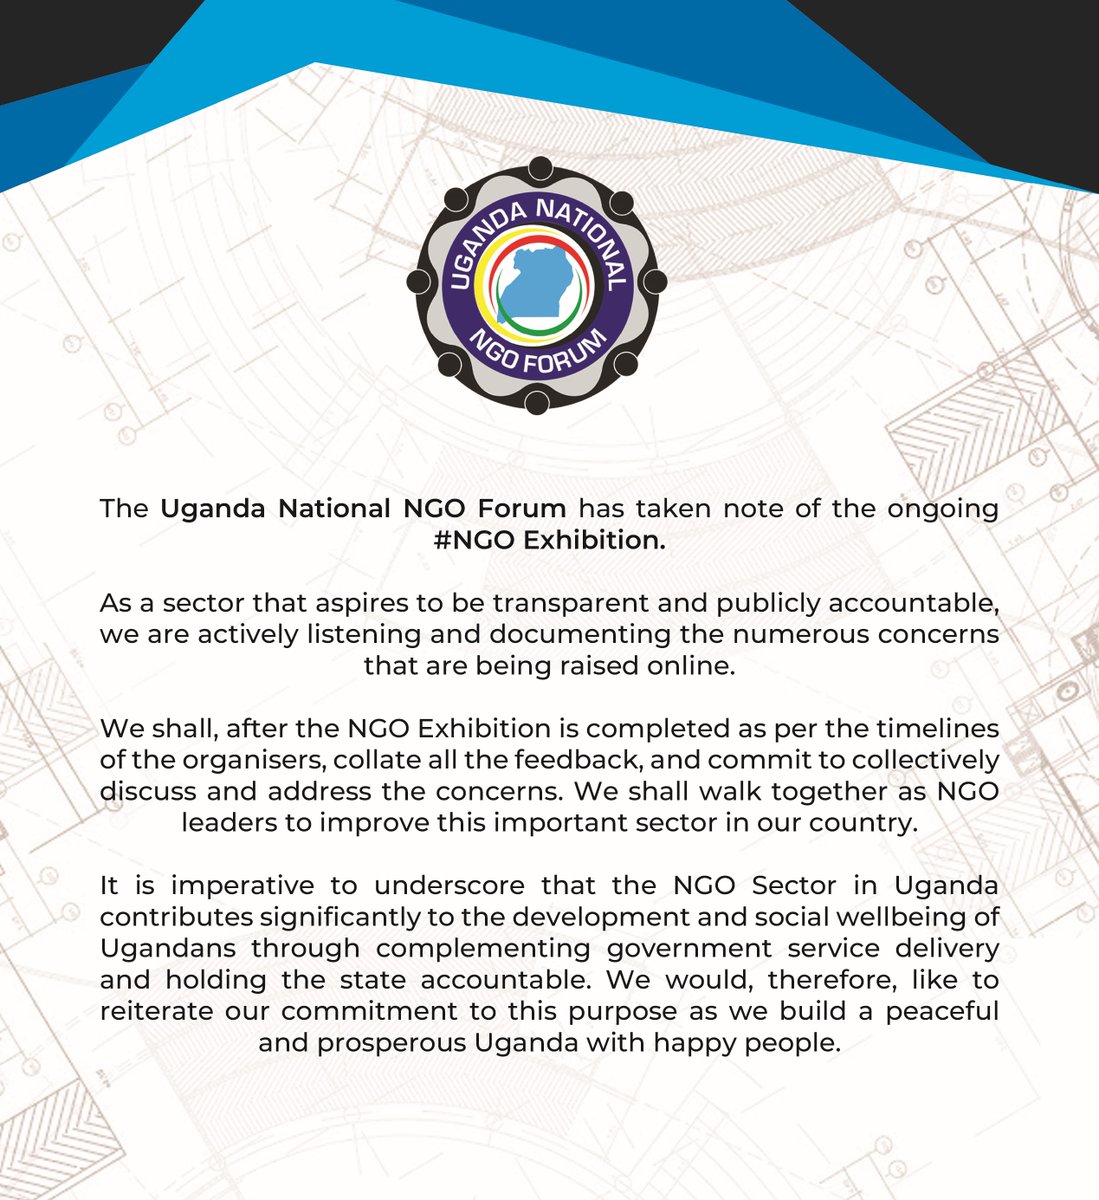 We have taken note of the ongoing #UgandaNGOsExhibition. As a sector that aspires to be transparent & publicly accountable, we are actively listening & documenting the numerous concerns. We commit to collectively discuss & address the concerns. Read full statement here⤵️